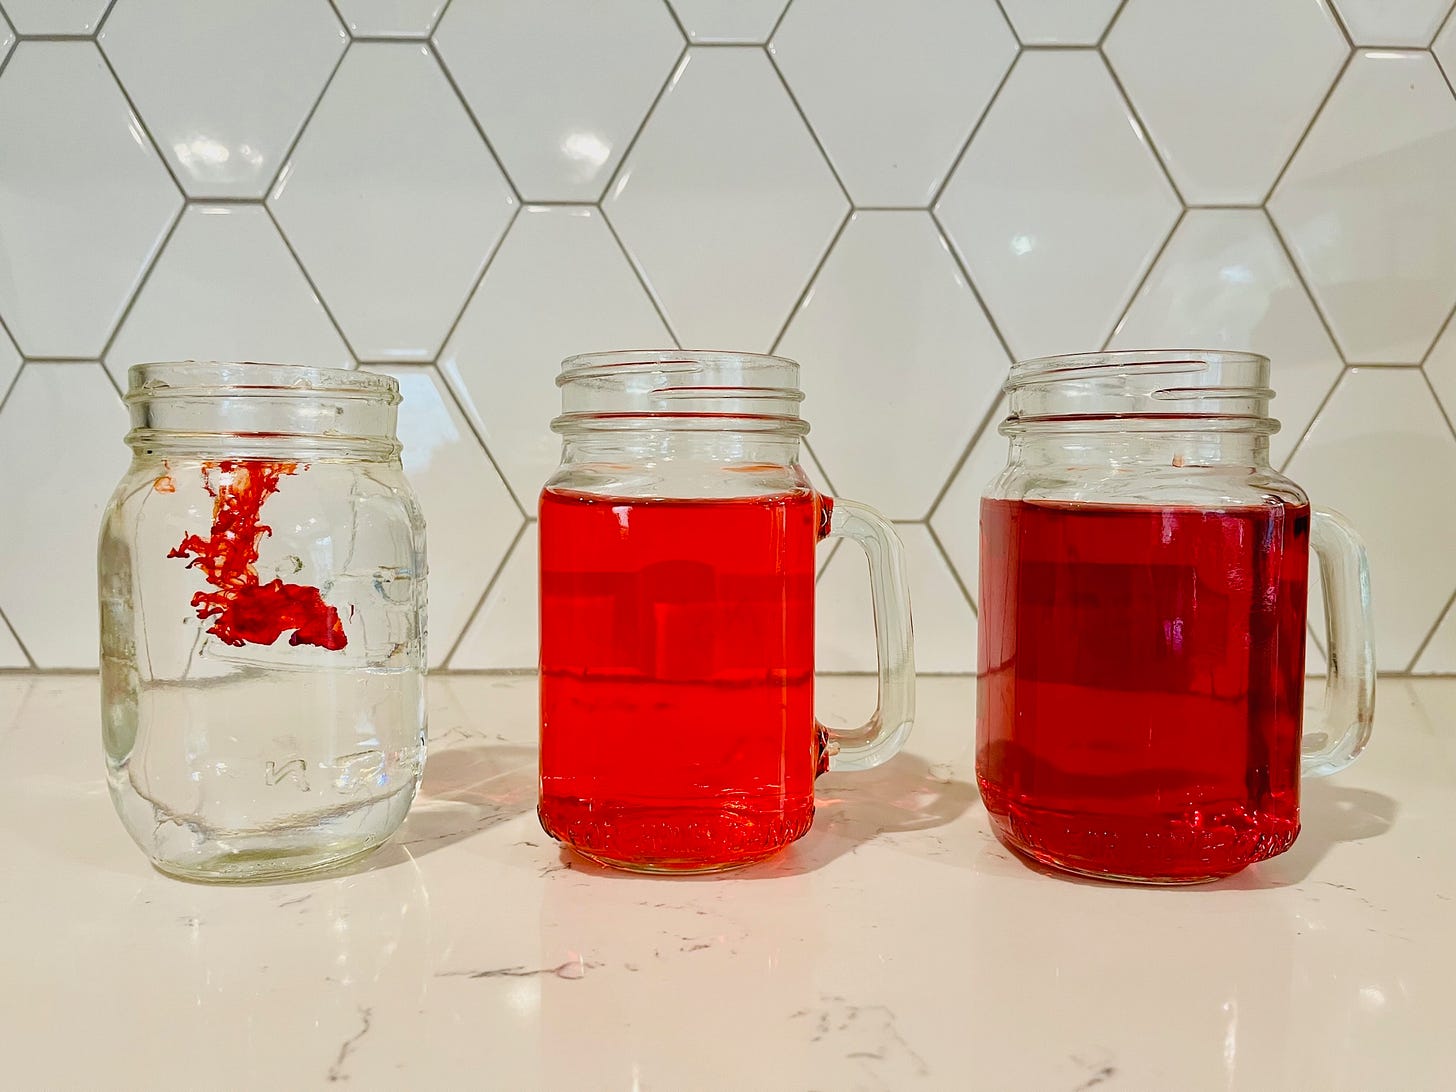 three glass cups of water, the first has a drop of red food coloring billowing out into the water, the next two glasses are full of red liquid